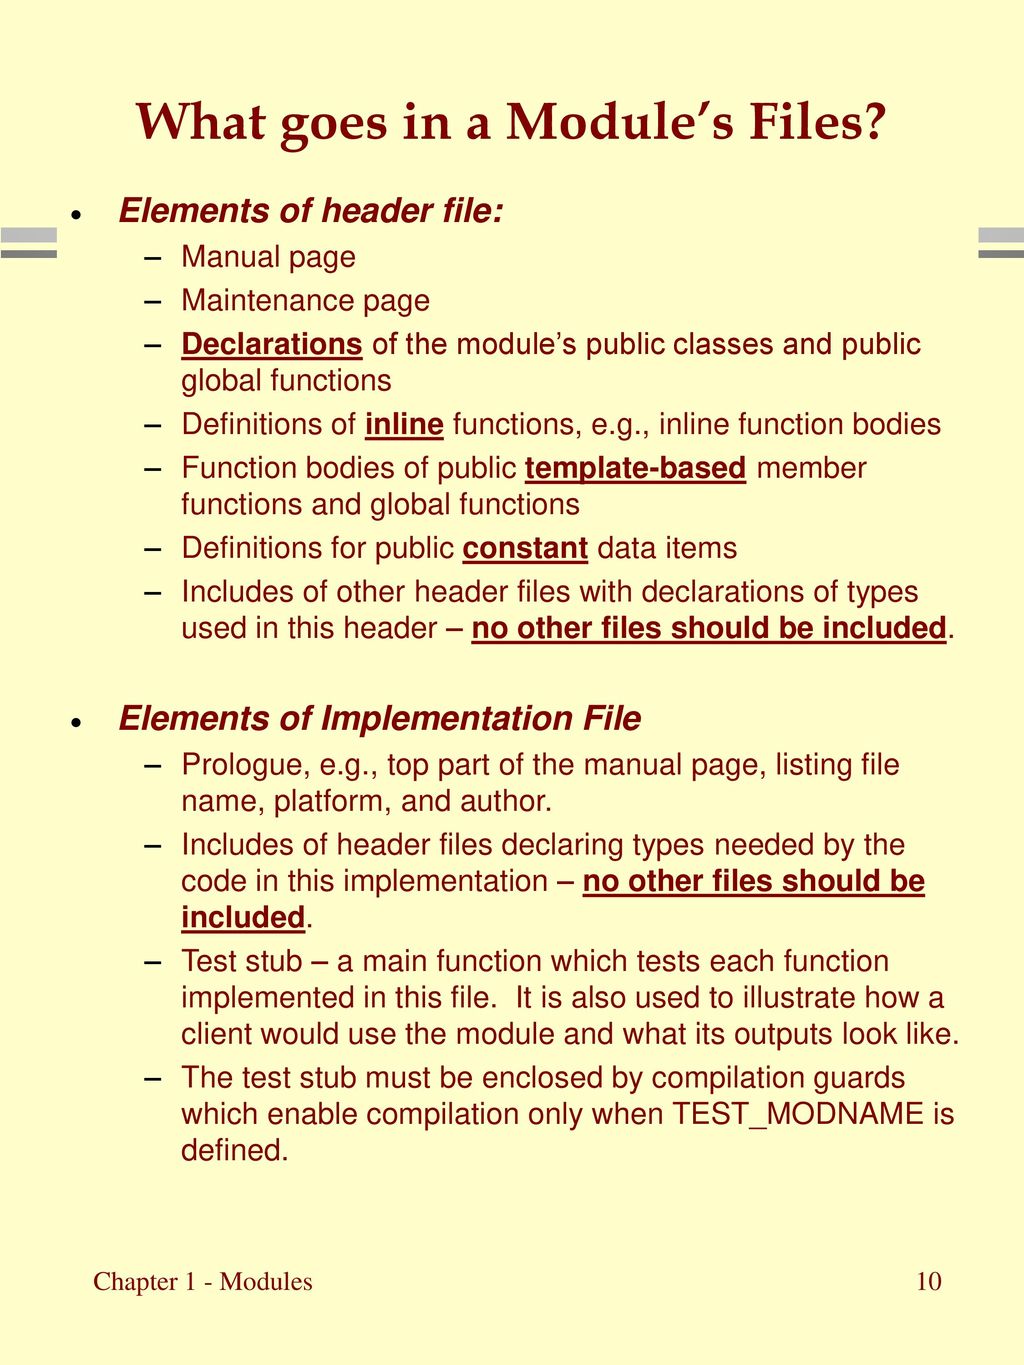 What goes in a Module’s Files